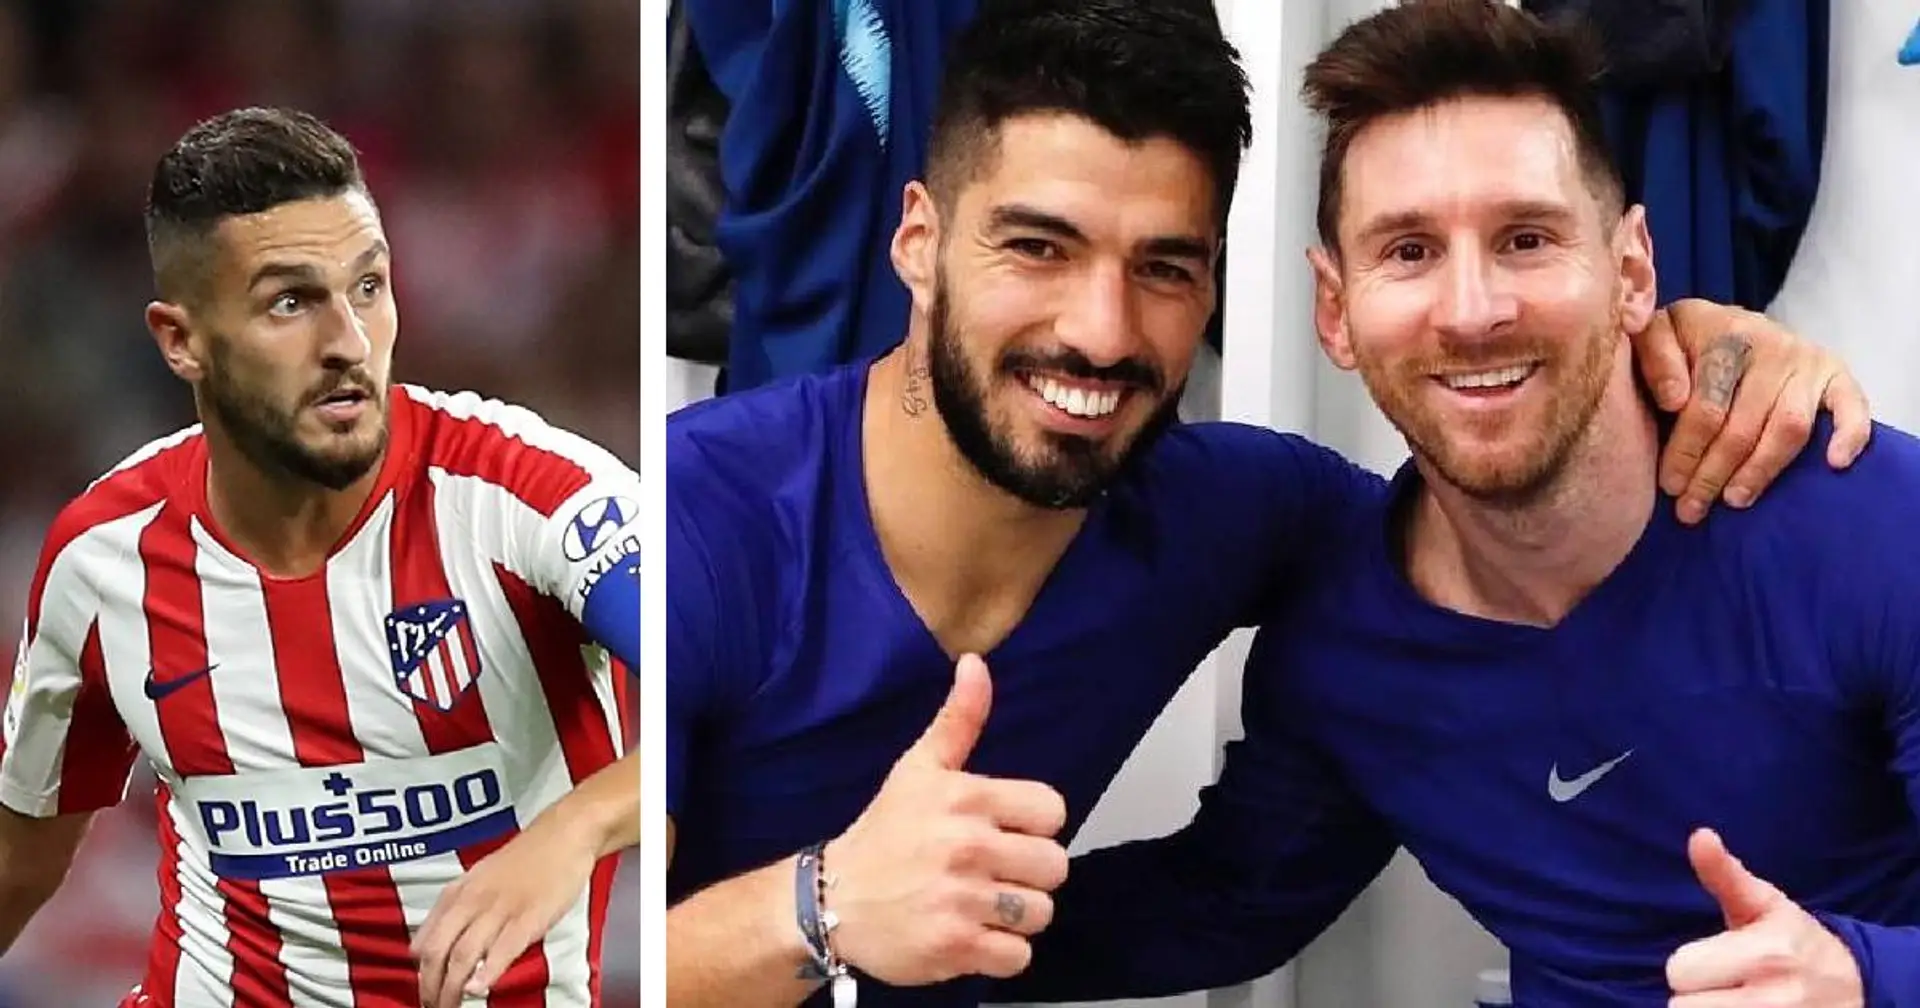 'Maybe Suarez can convince him': Atleti ace Koke speculates on Leo Messi's move